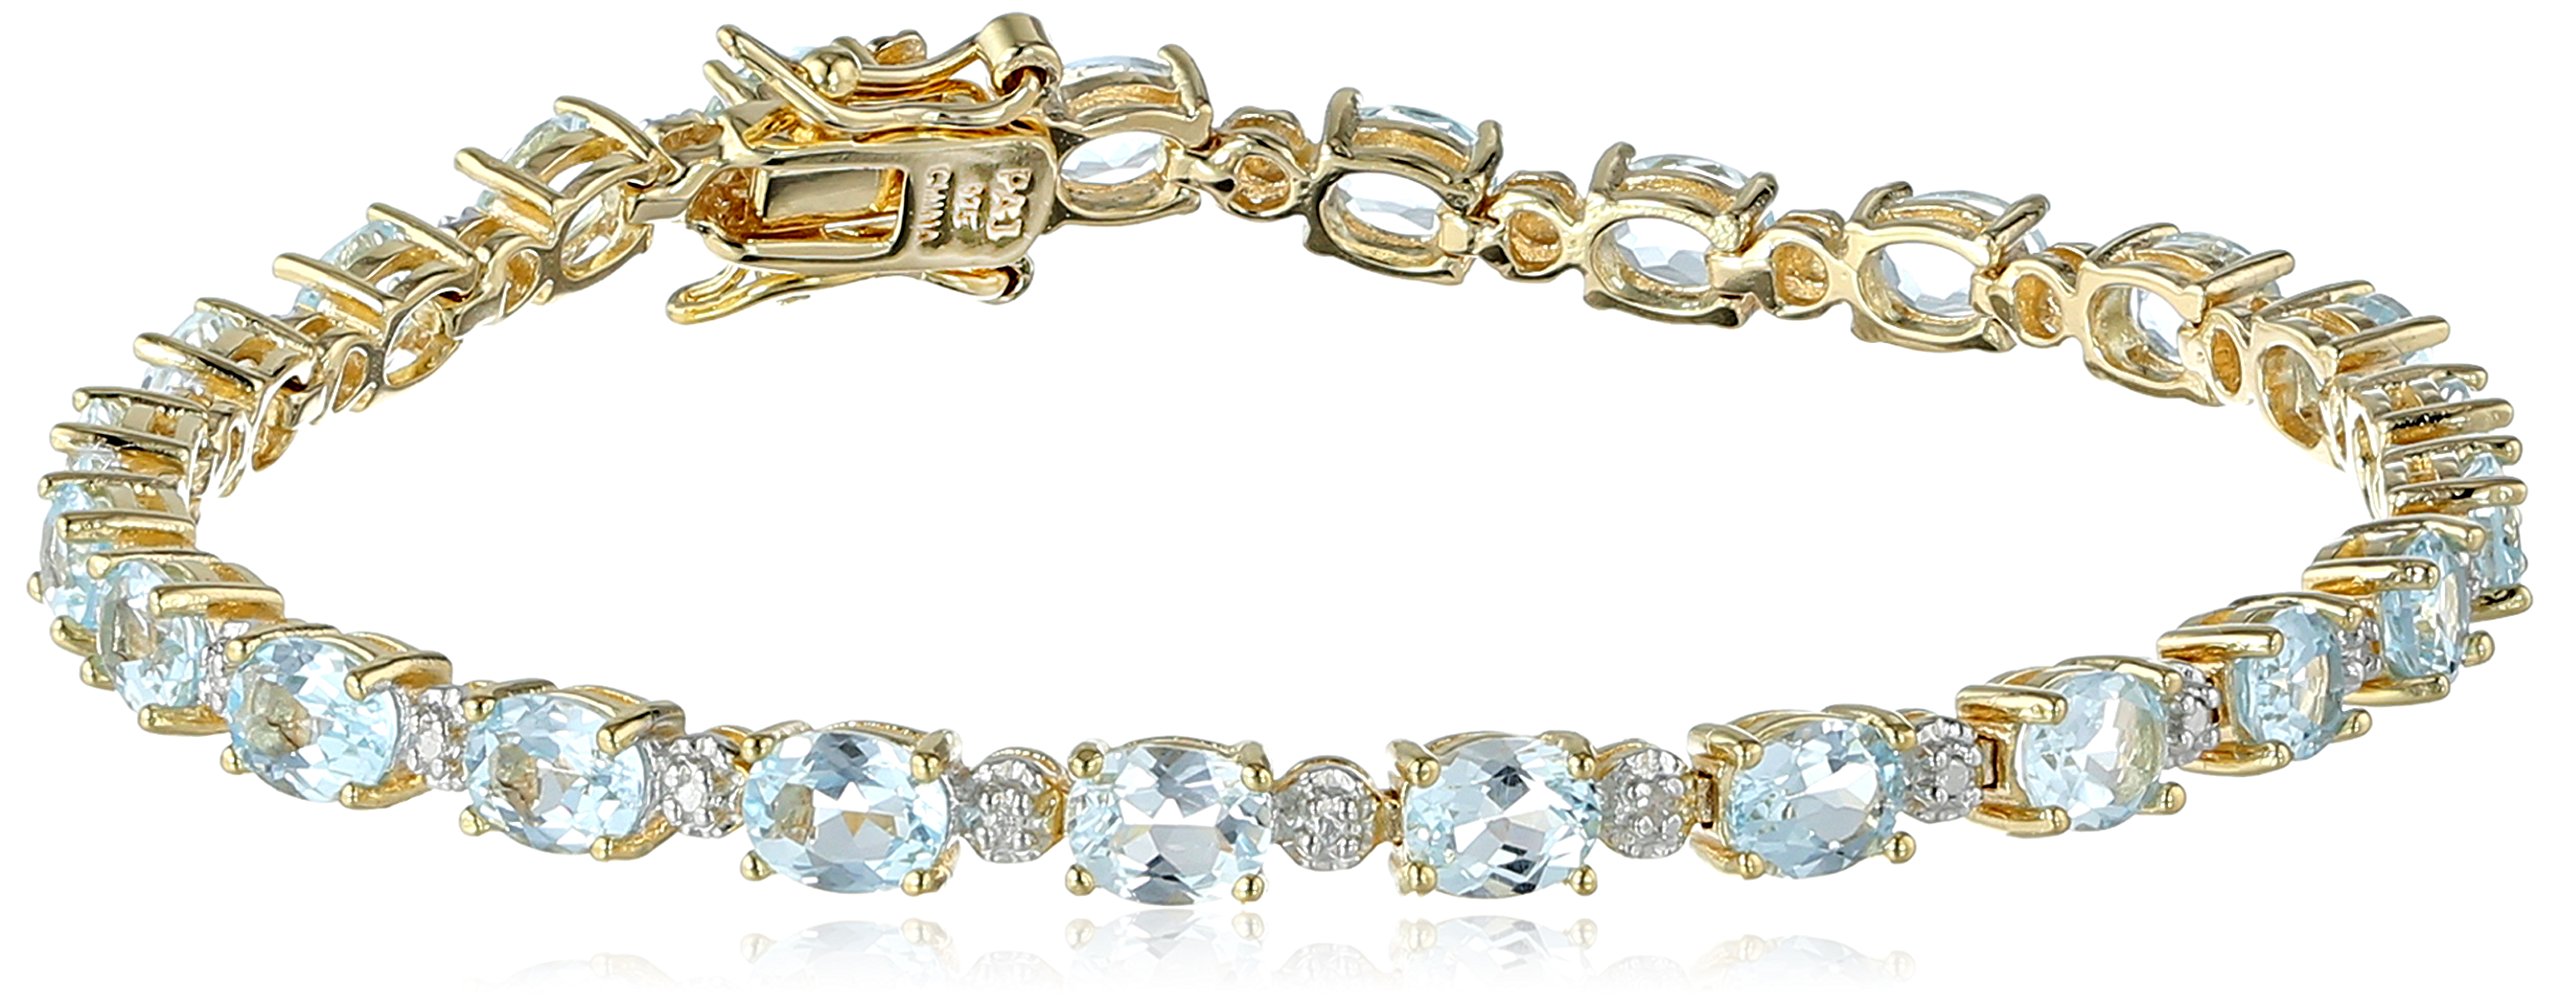 Amazon Collection 18k Yellow Gold Plated Sterling Silver Genuine Gemstones and Diamond Accent Tennis Bracelet